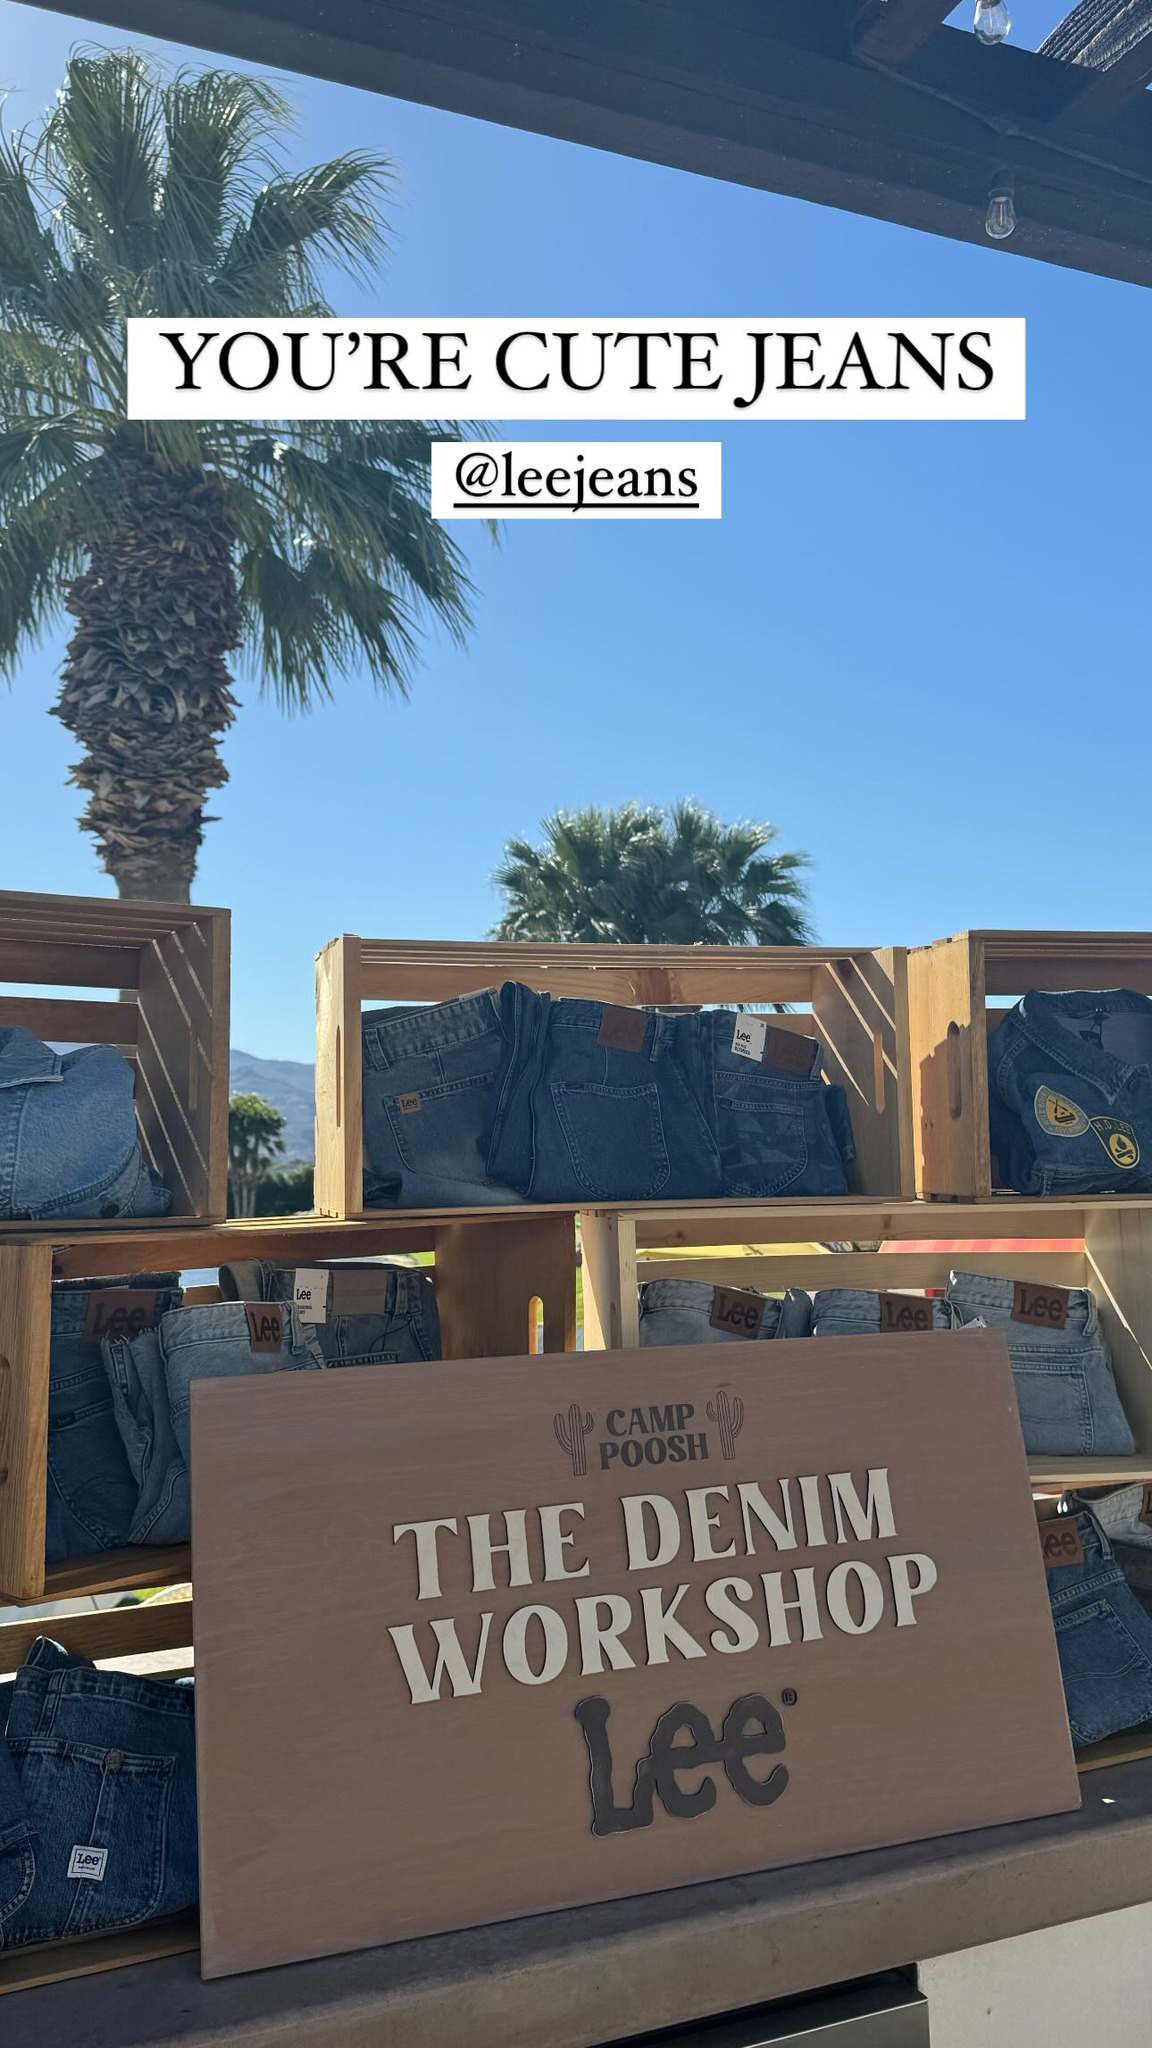 The camp included a Lee Denim Workshop, where campers could customize their jeans by dyeing the material and adding patches